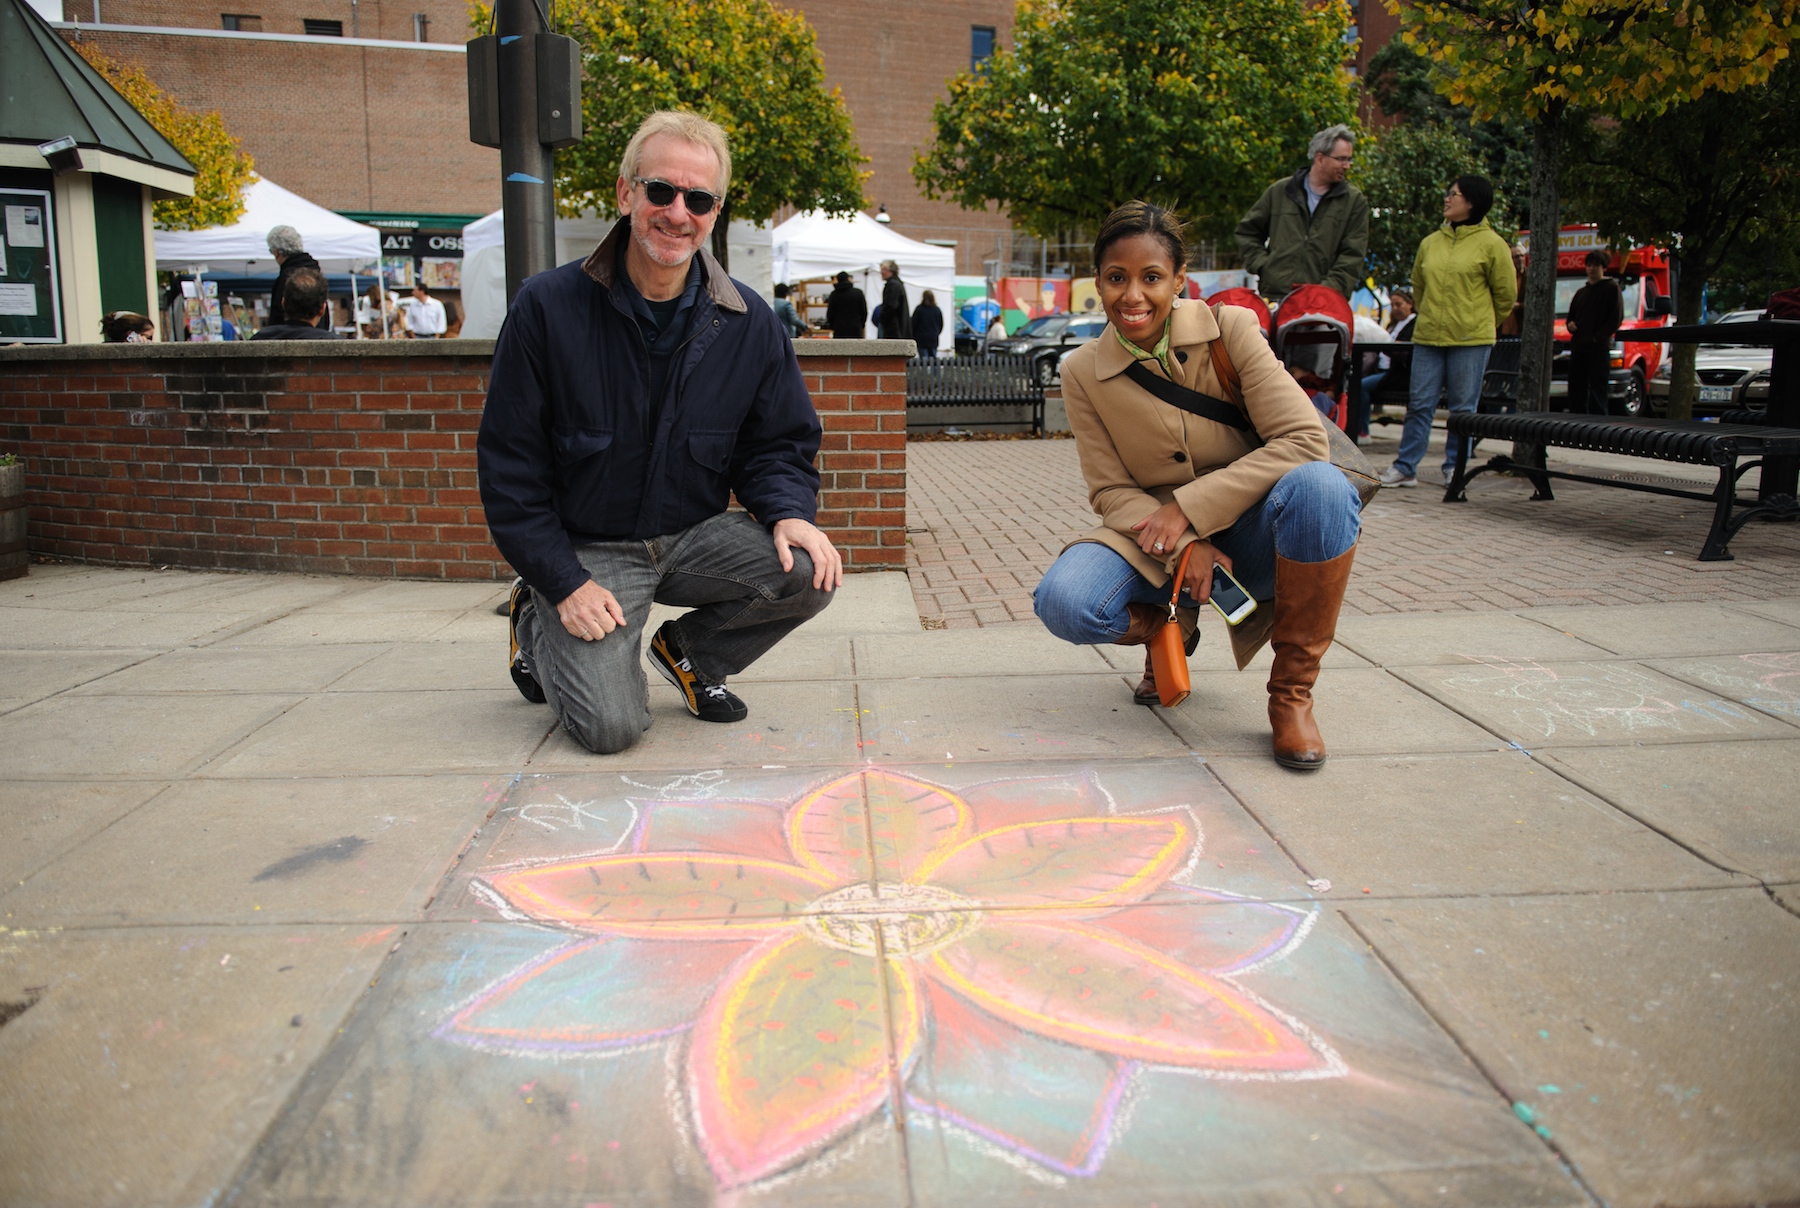 Ossining Village Manager Richard Leins and Ingrid Richards, Manager of Downtown & Economic Development, at the Village of Ossining’s First Annual Chalk It Up! Festival held recently at Market Square